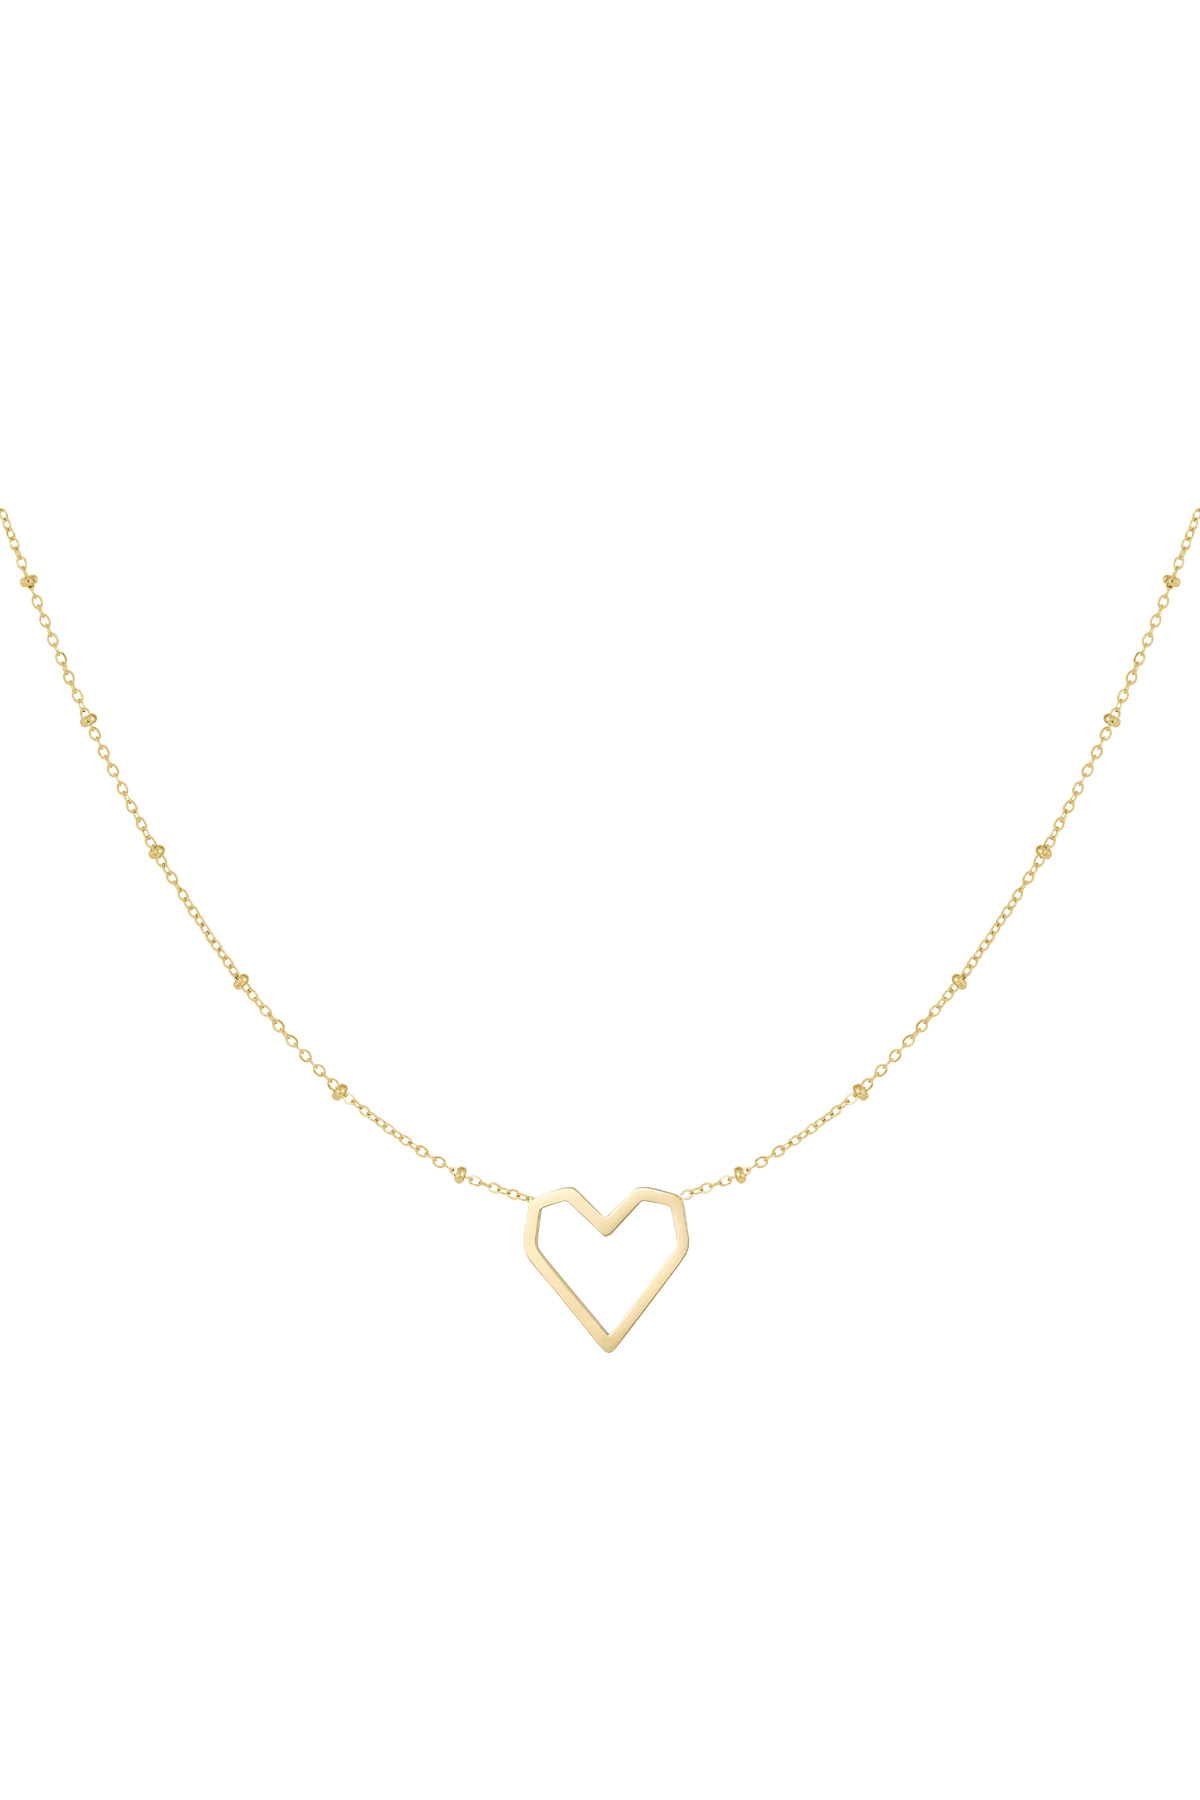 Necklace heart with dots - gold h5 